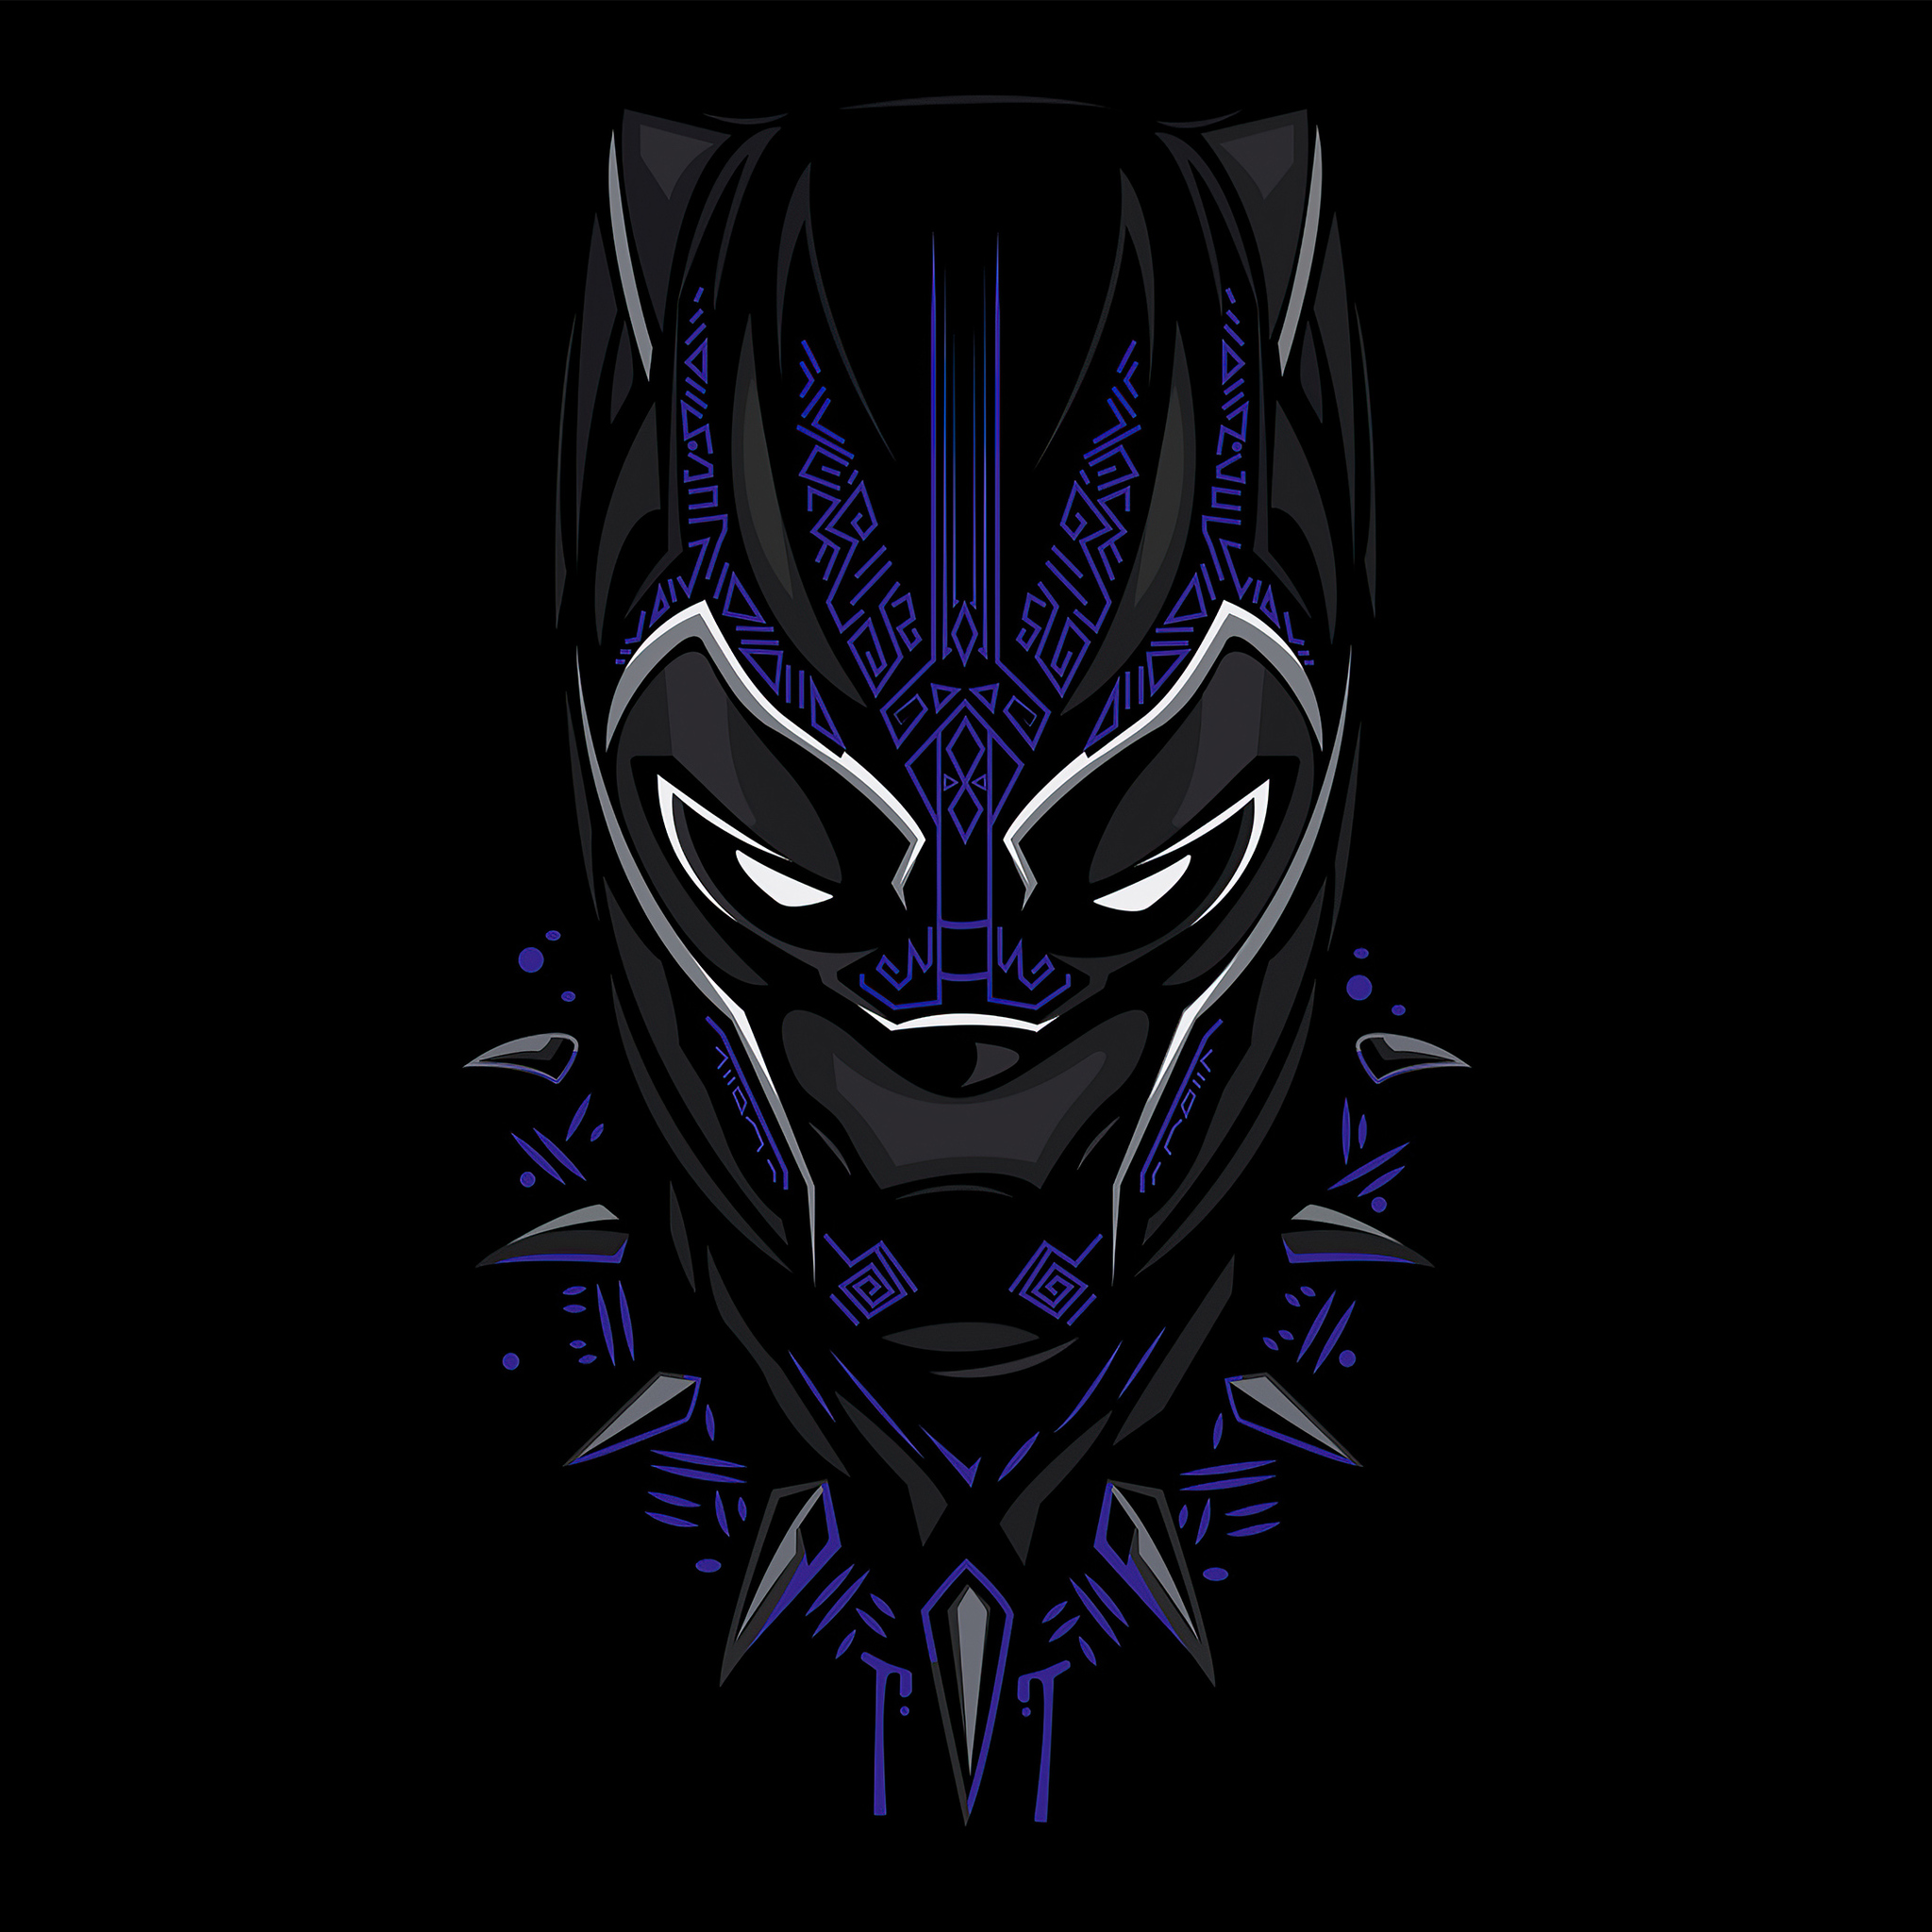 4k-wallpapers. black-panther-wallpapers. hd-wallpapers. dribbble-wallpapers...